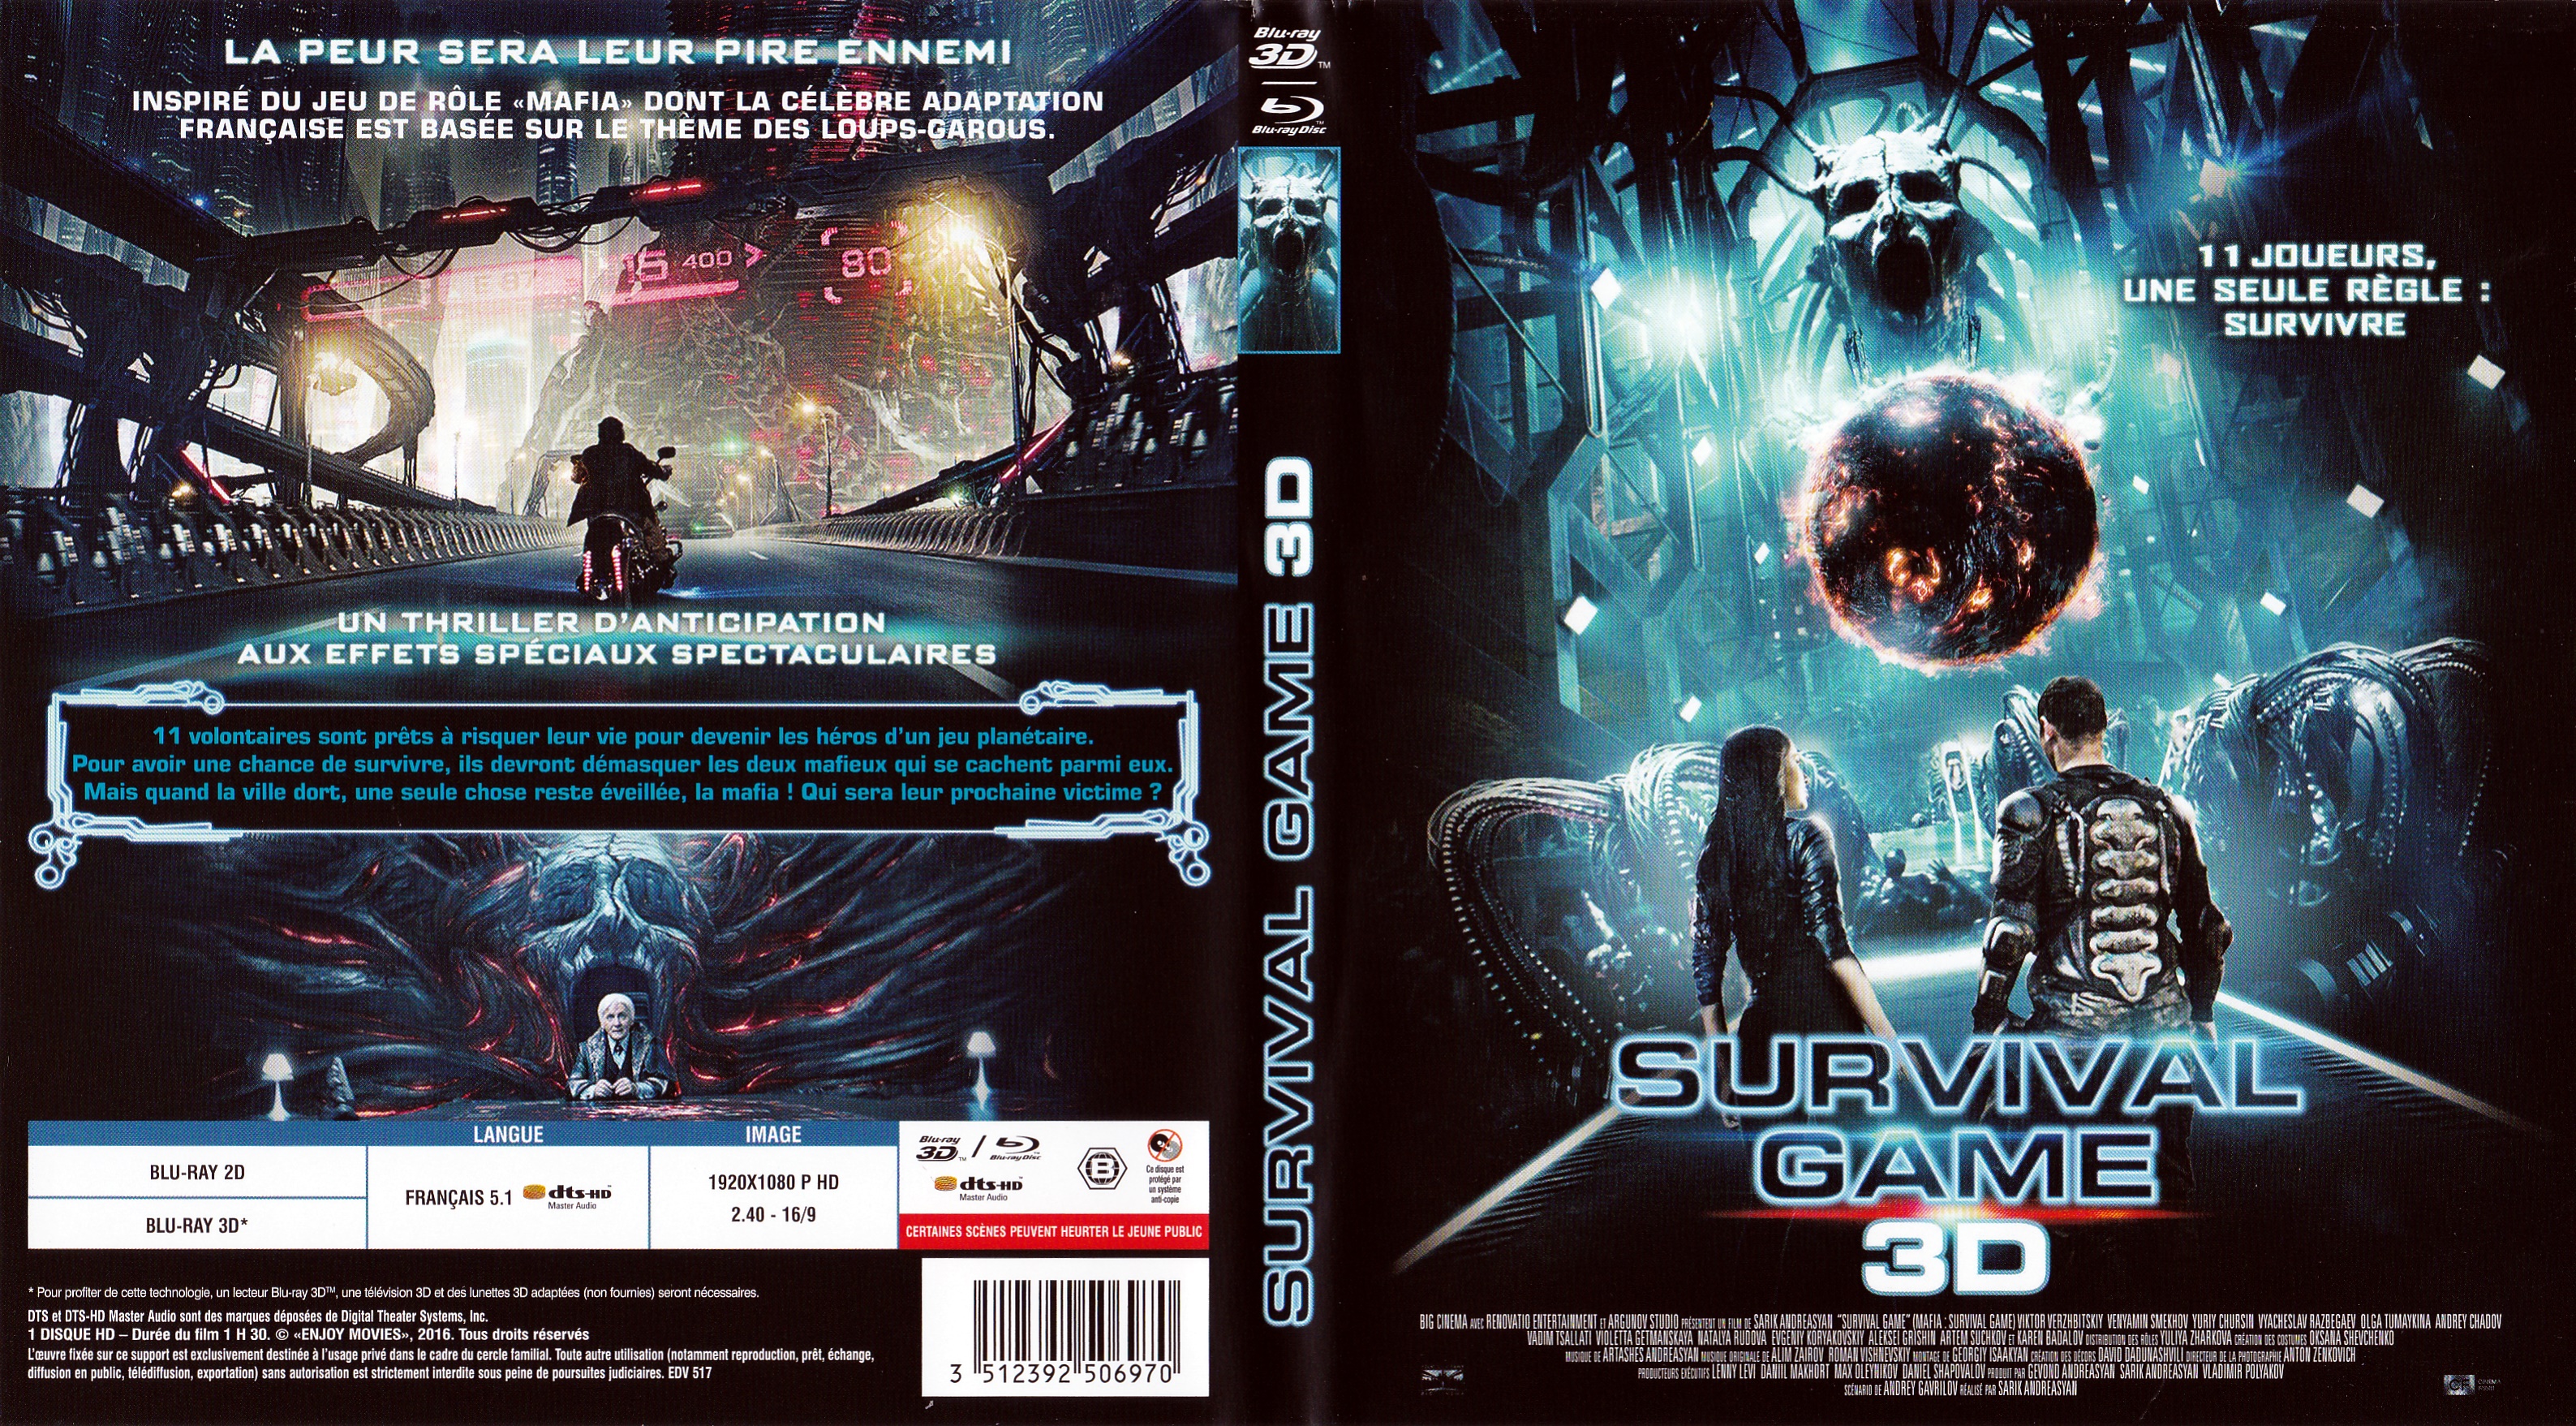 Jaquette DVD Survival game 3D (BLU-RAY)